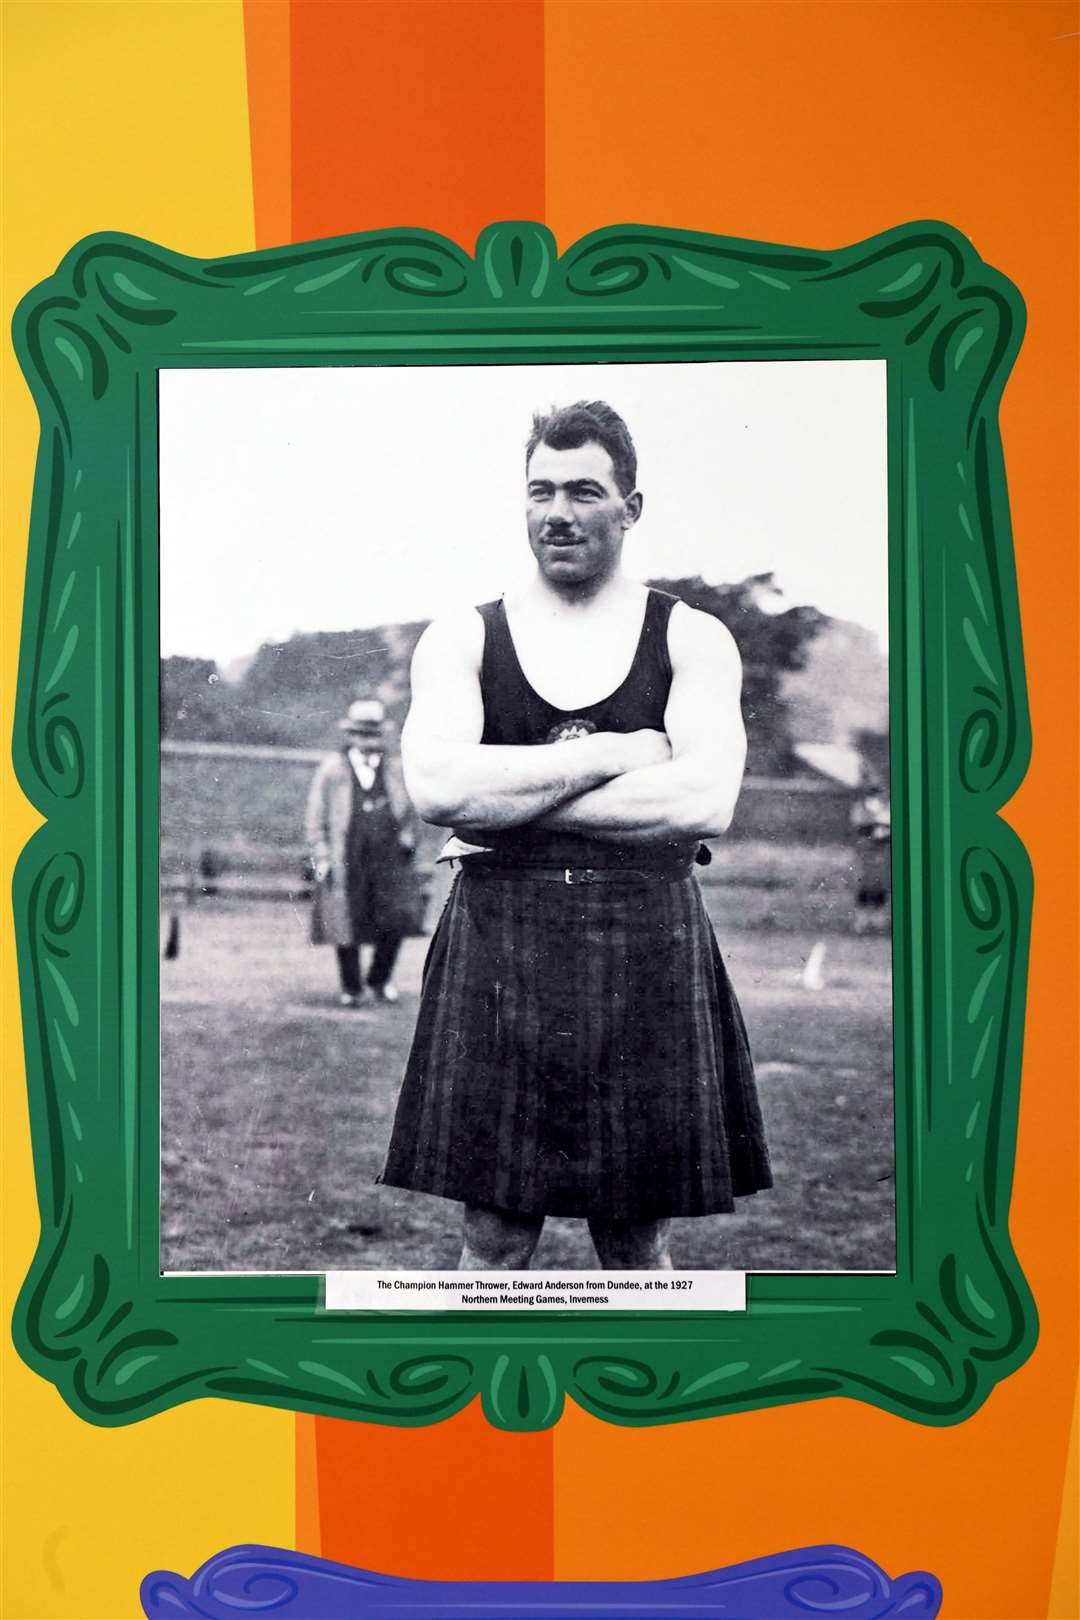 Champion hammer thrower, Edward Anderson from Dundee, at the 1927 Northern Meeting Games, Inverness.